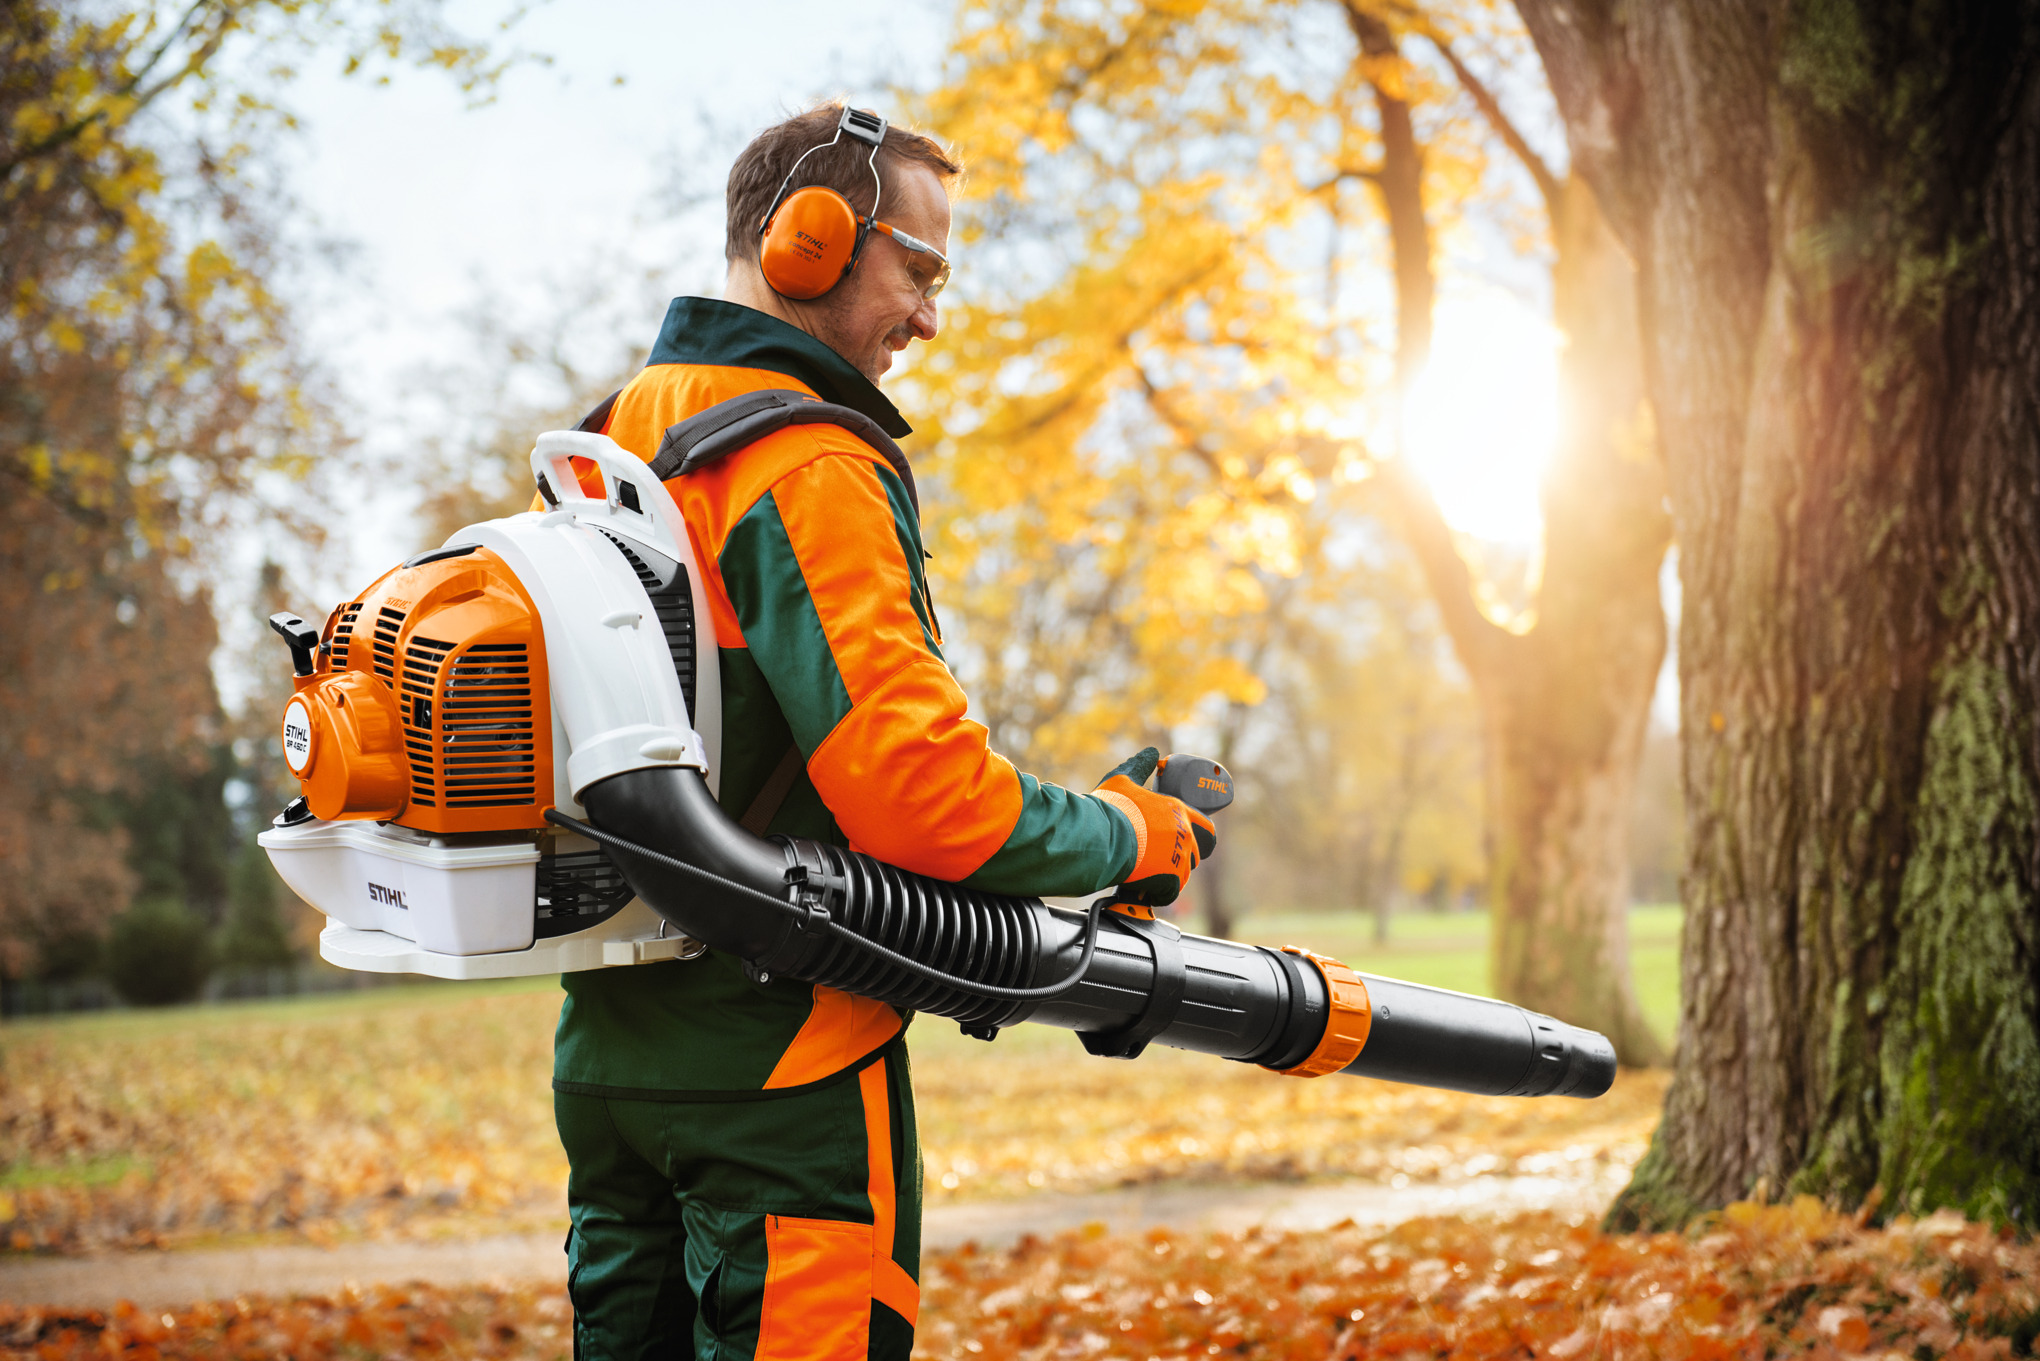 STIHL ELECTRIC START FOR BACKPACK BLOWERS